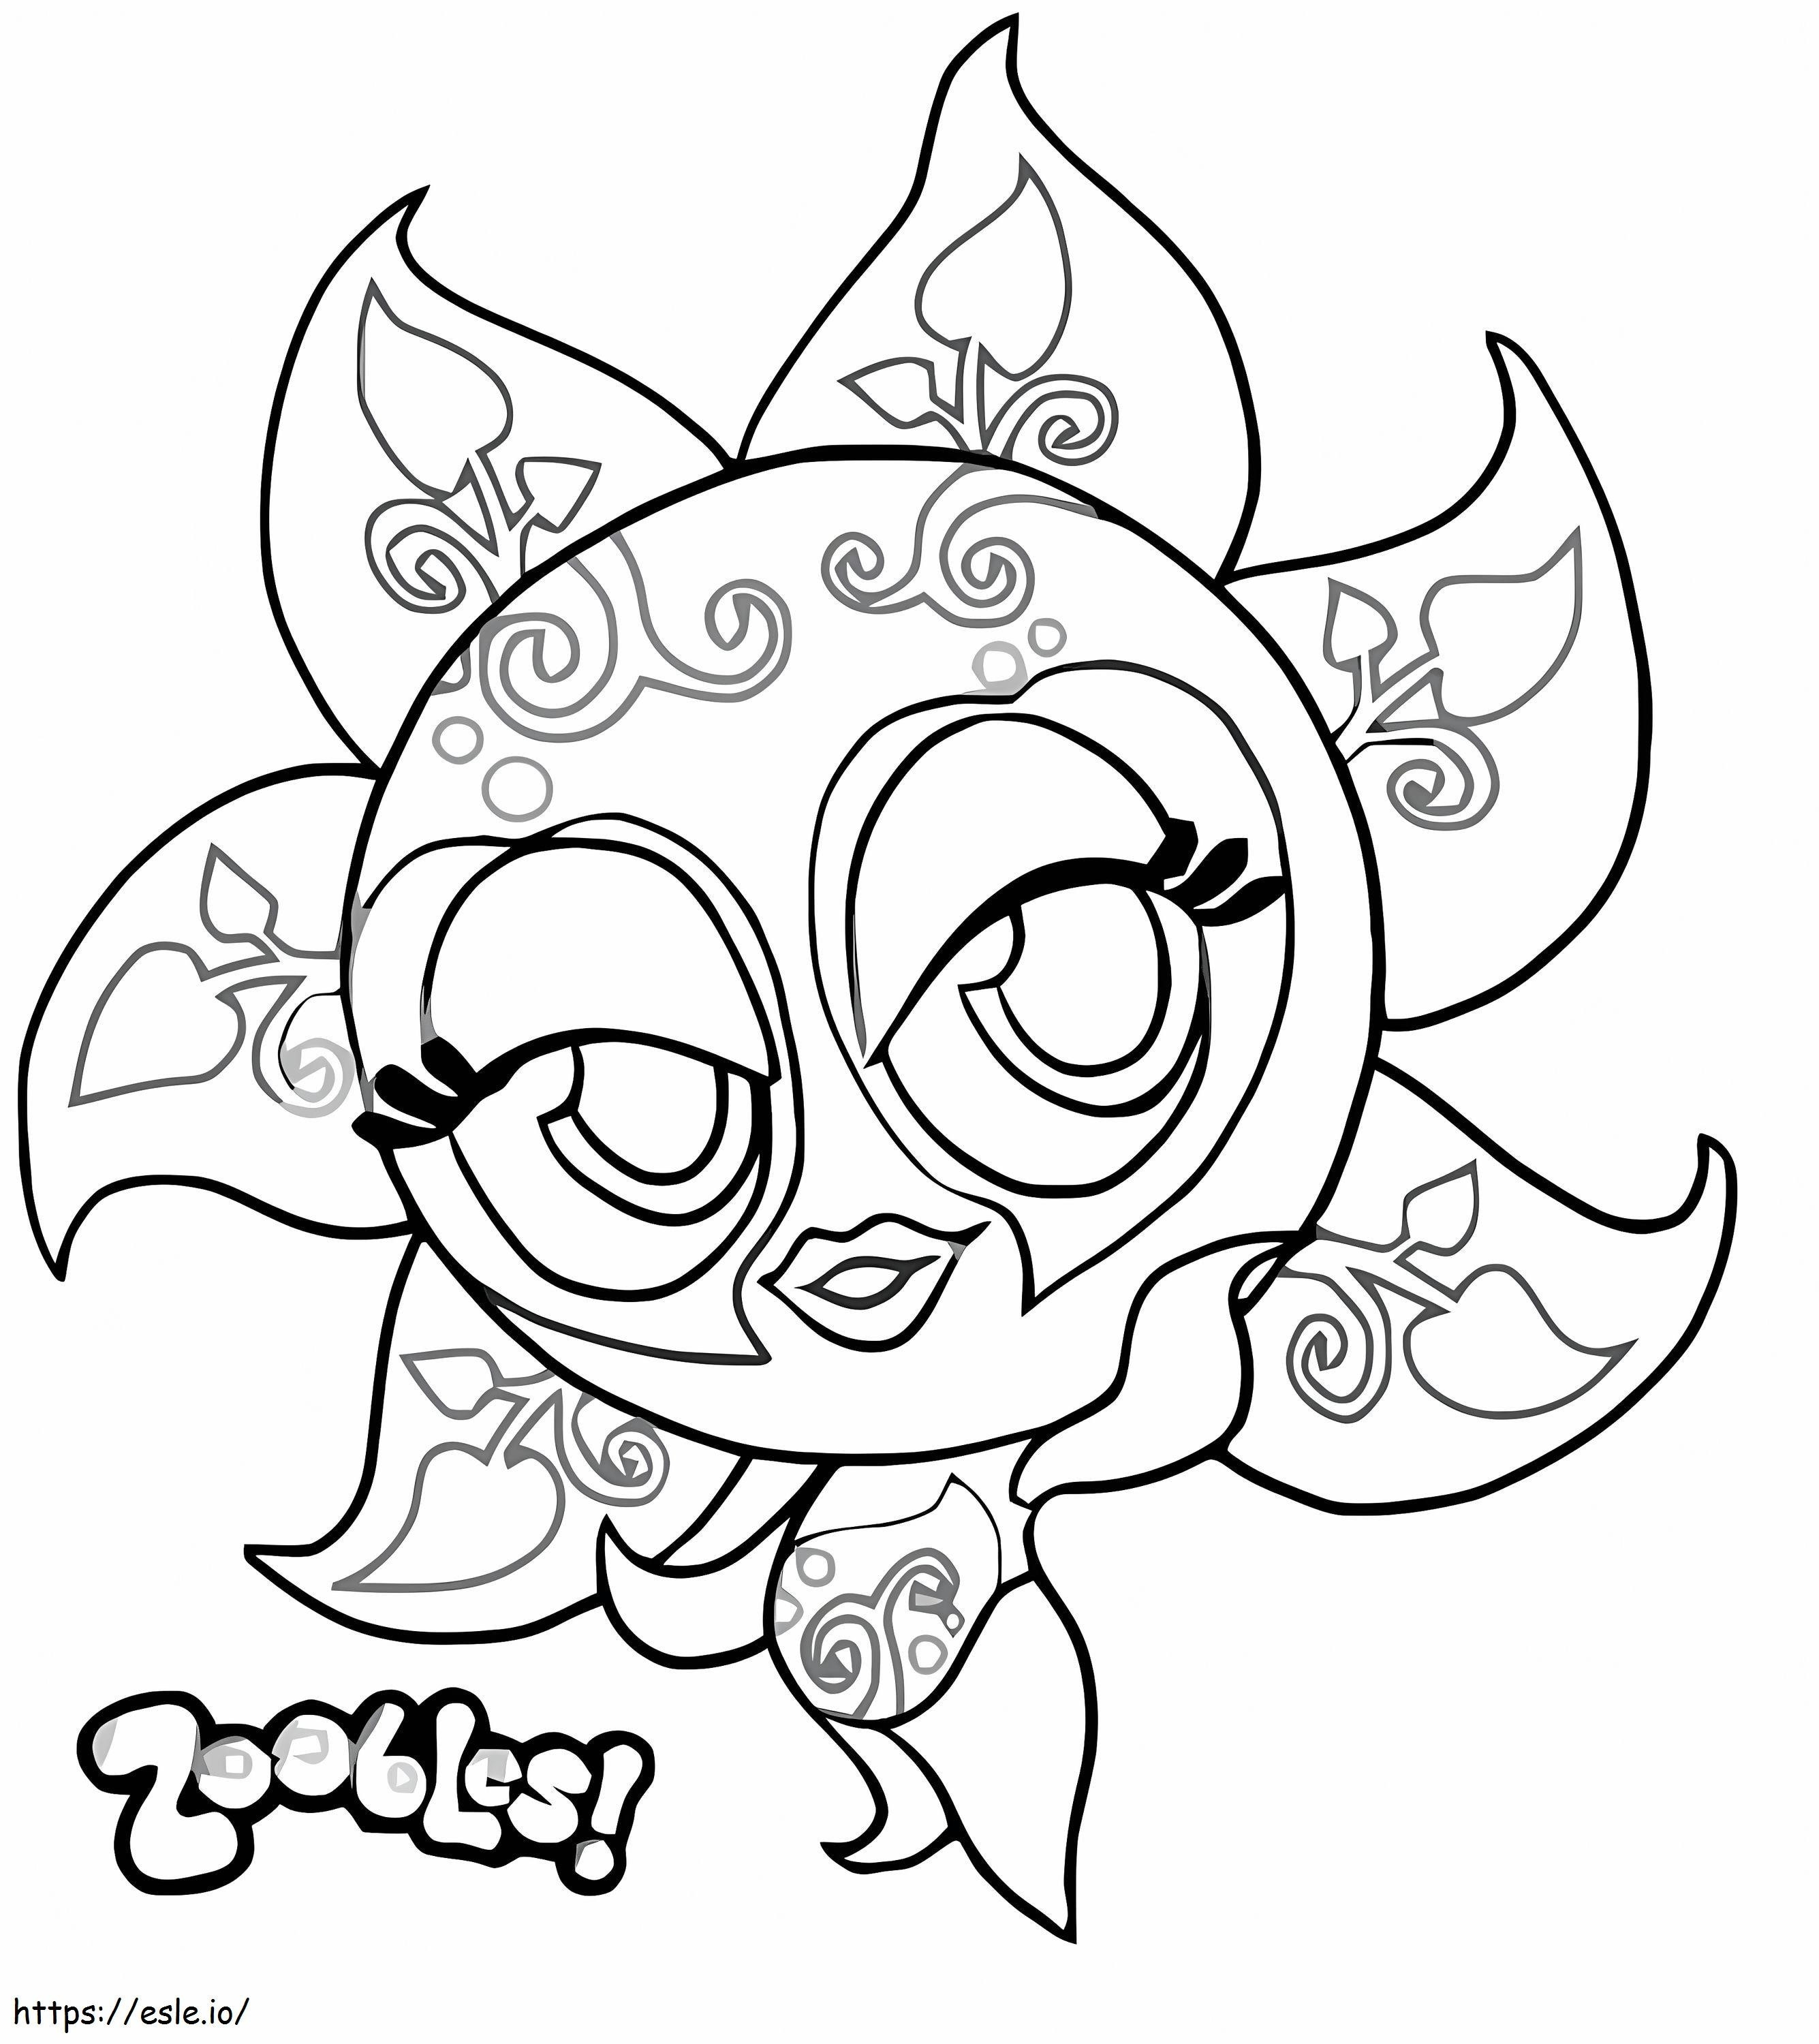 Zoobles Starfish coloring page